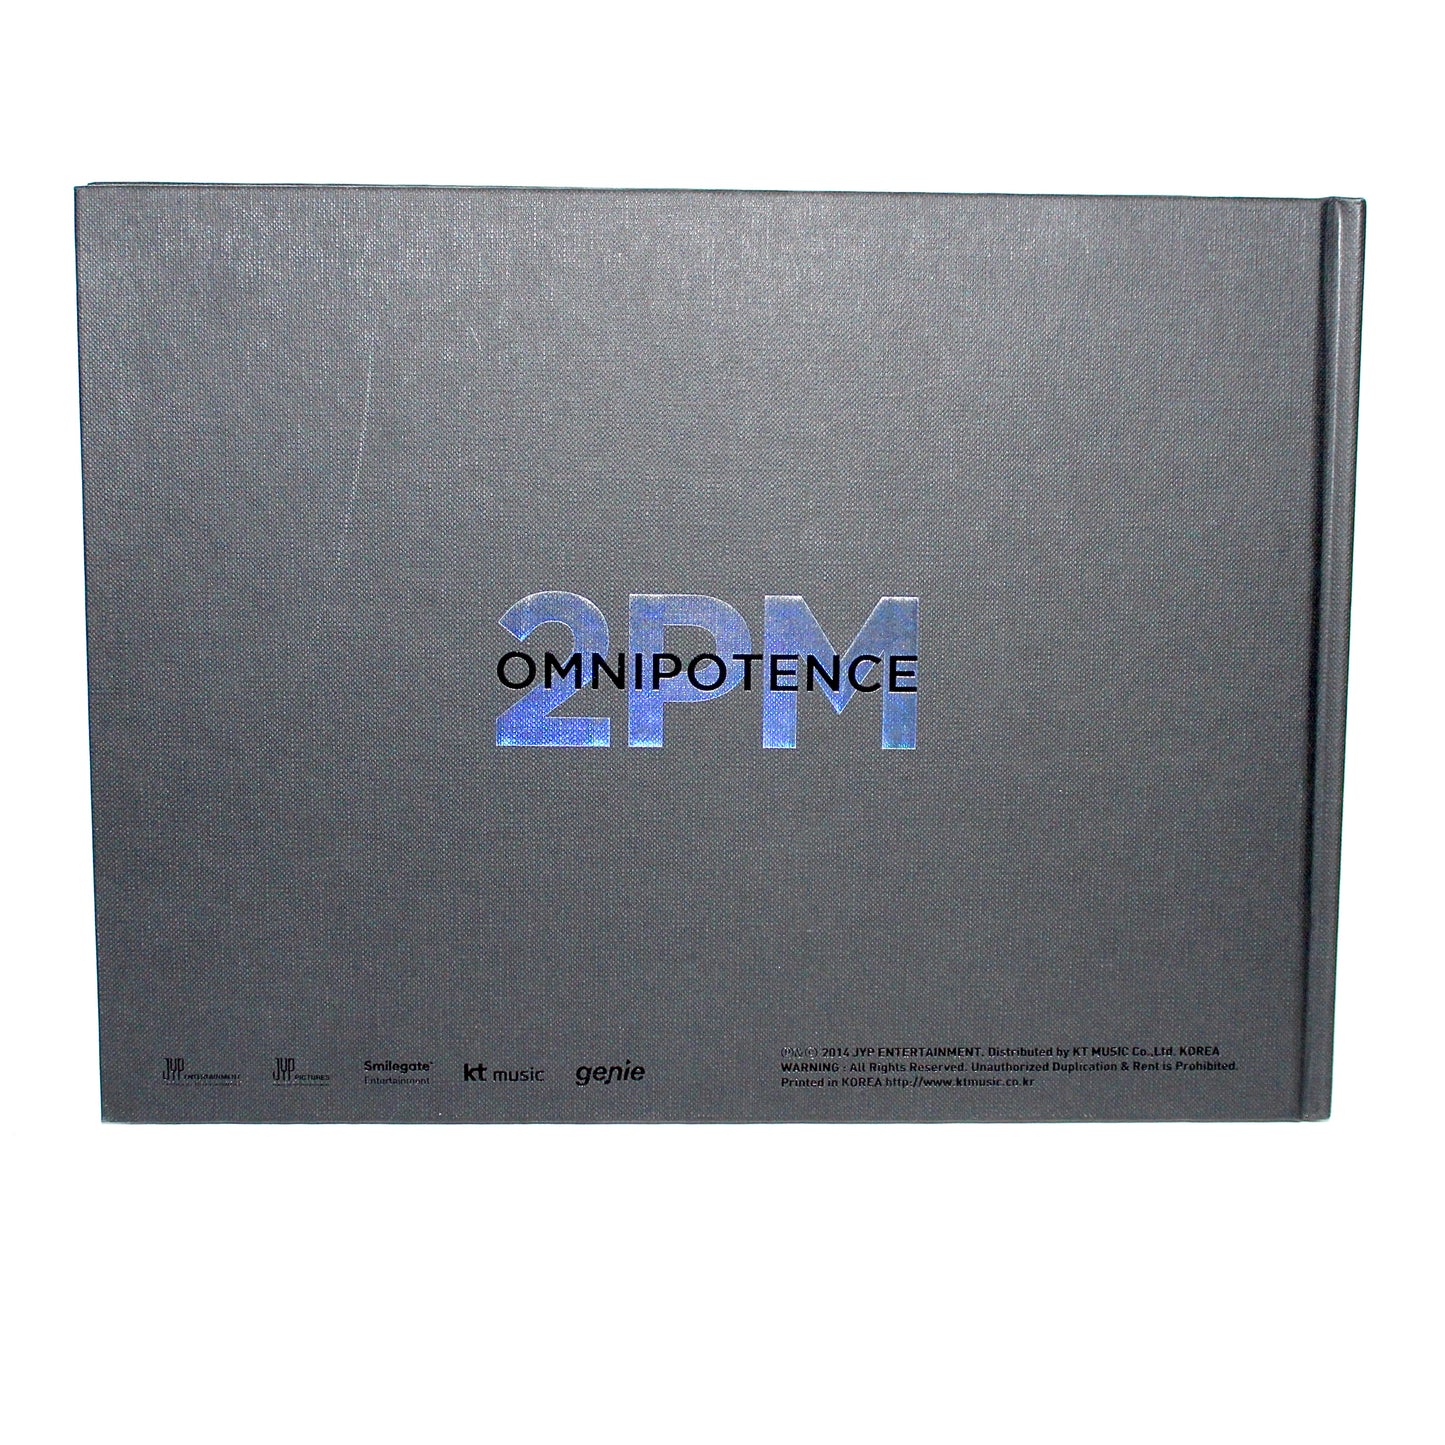 2PM Concept Photobook: OMNIPOTENCE